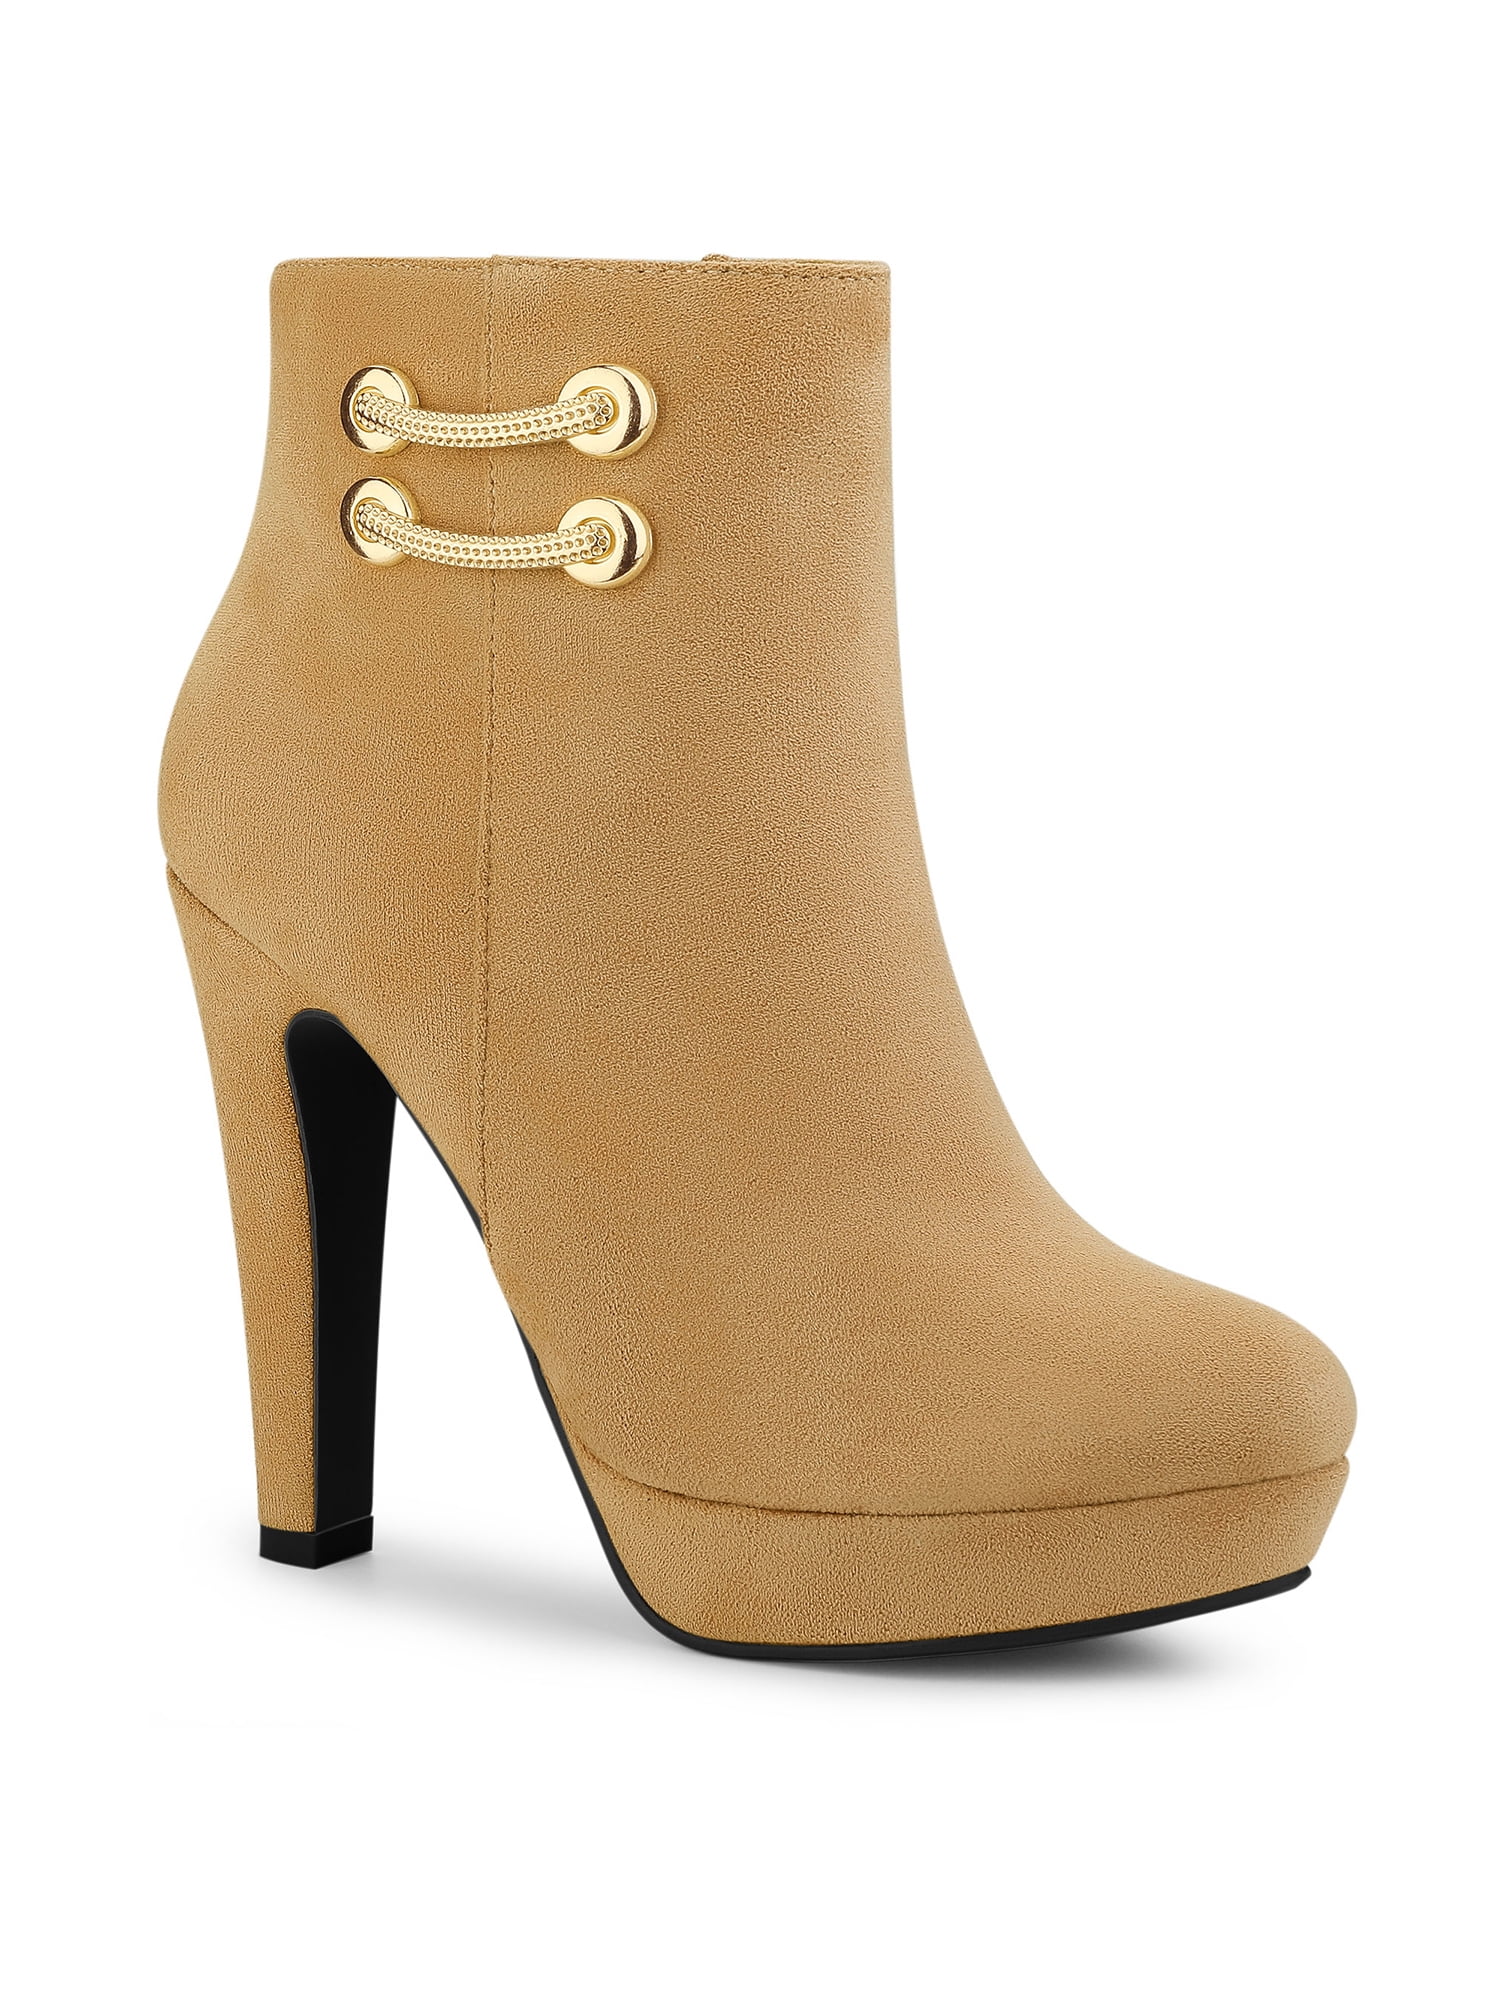 Details about   New Women's Round Toe Stilettos High Heels Color Stitching Ankle Boots Shoes sz 